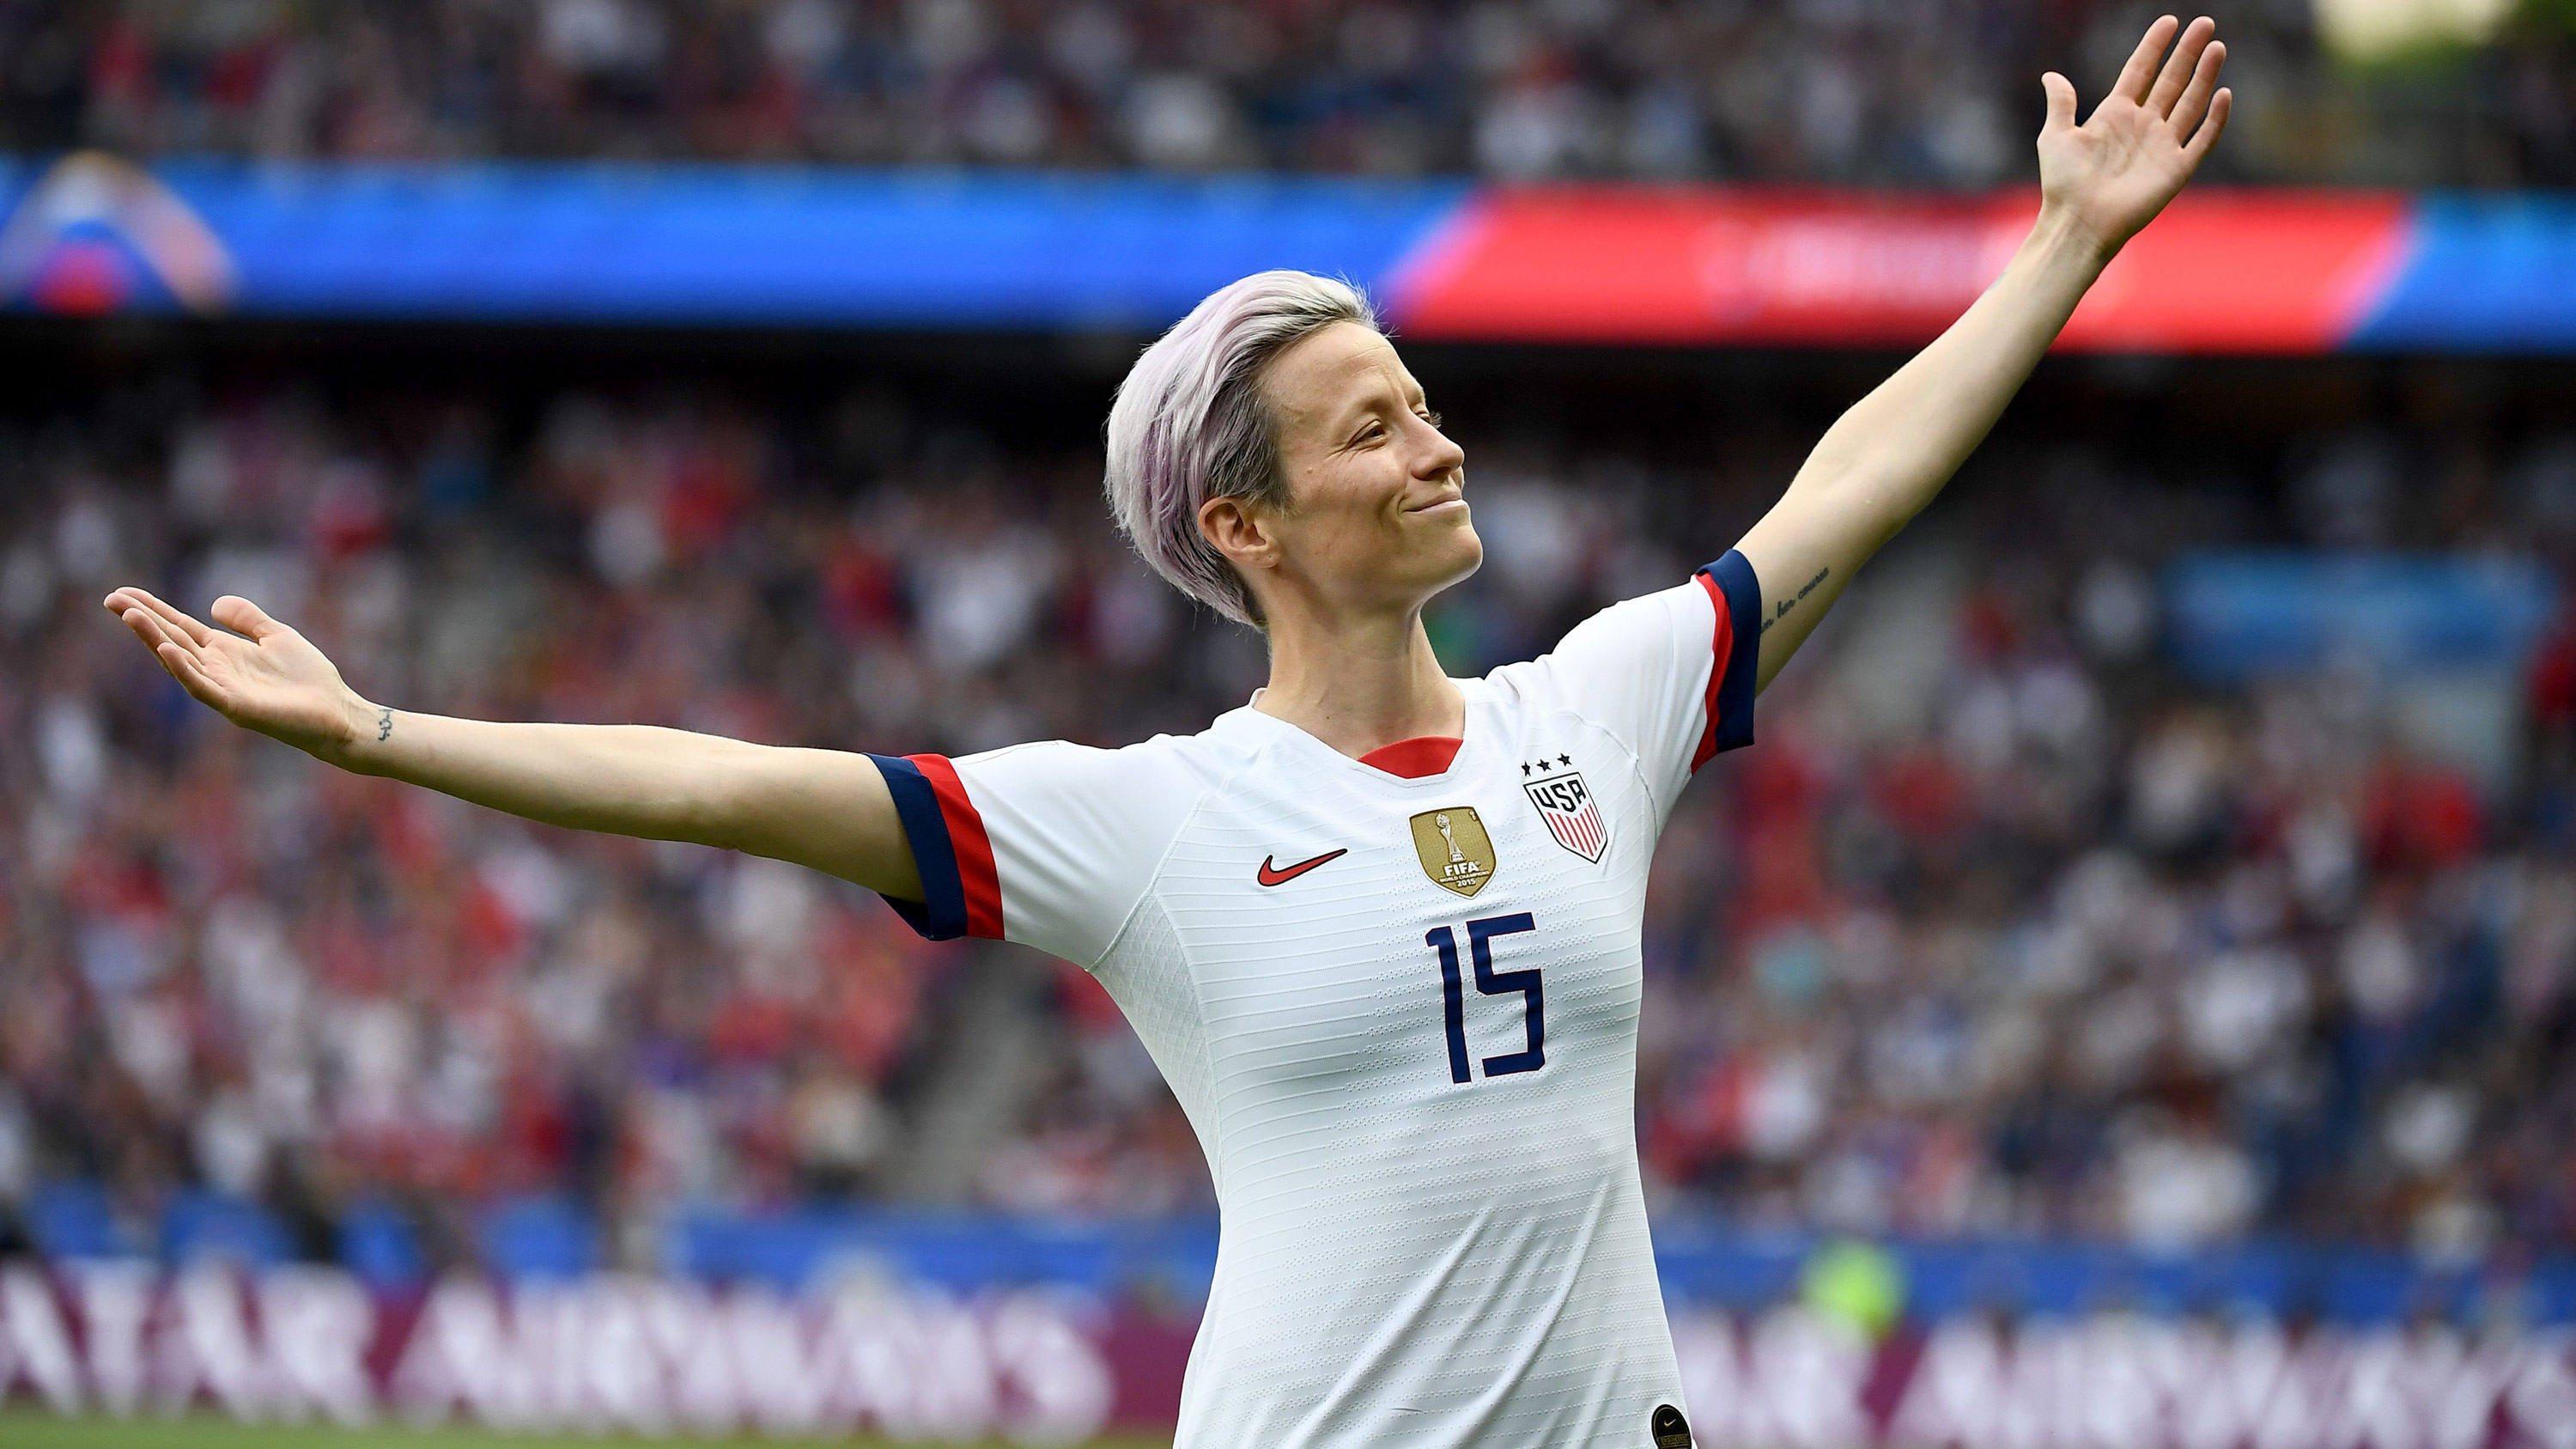 Megan Rapinoe struck an epic pose after scoring against France in the  Women's World Cup | CNN